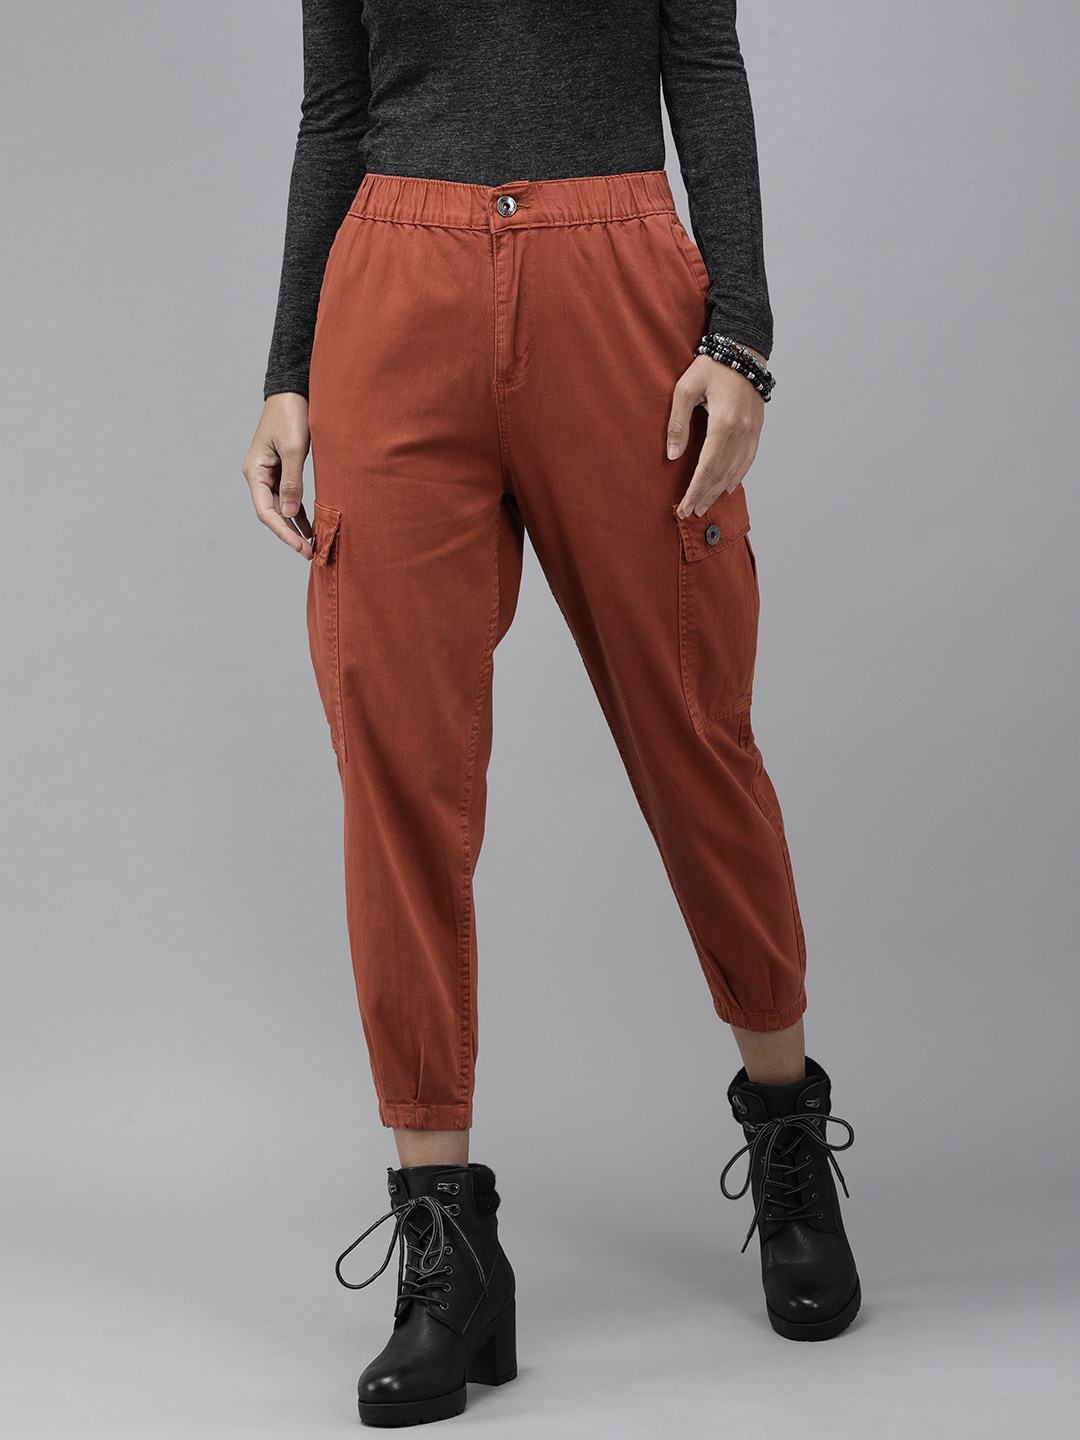 Roadster Women Rust Red Solid Regular Fit Mid-Rise Cargos Trousers Price in India